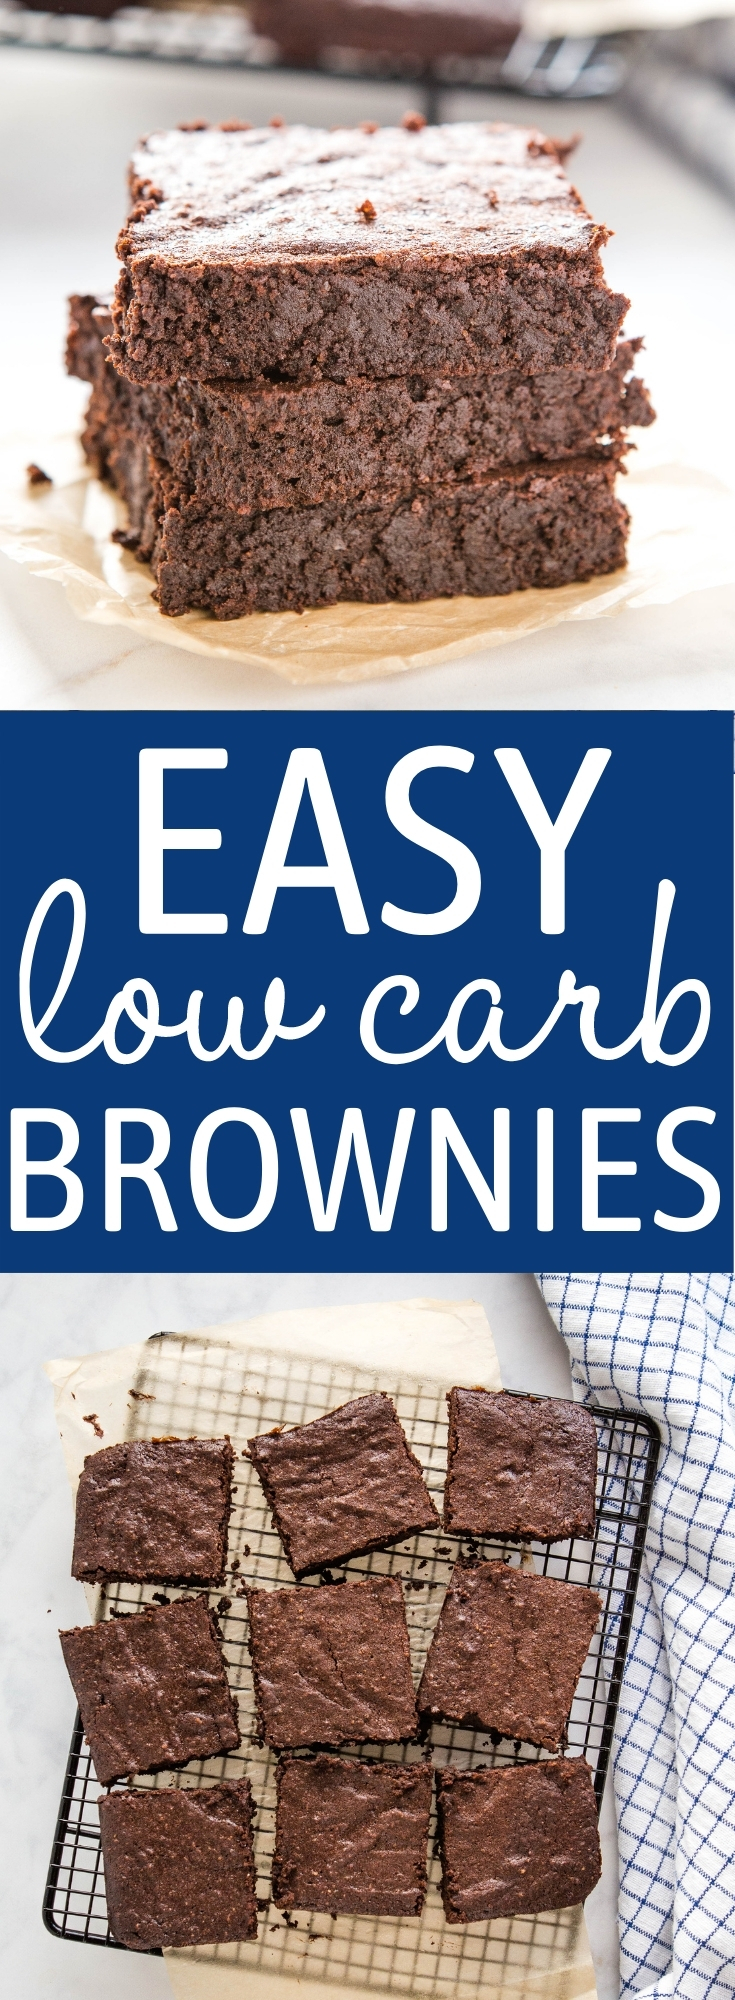 These Easy Low Carb Brownies are the perfect sugar-free, gluten-free dessert that's ultra moist, dense & chewy, and oh so chocolatey! Only 4 grams of carbs each! Recipe from thebusybaker.ca! #brownies #keto #lowcarb #sugarfree #glutenfree #healthy #stevia #lowcarbdessert #healthydessert via @busybakerblog